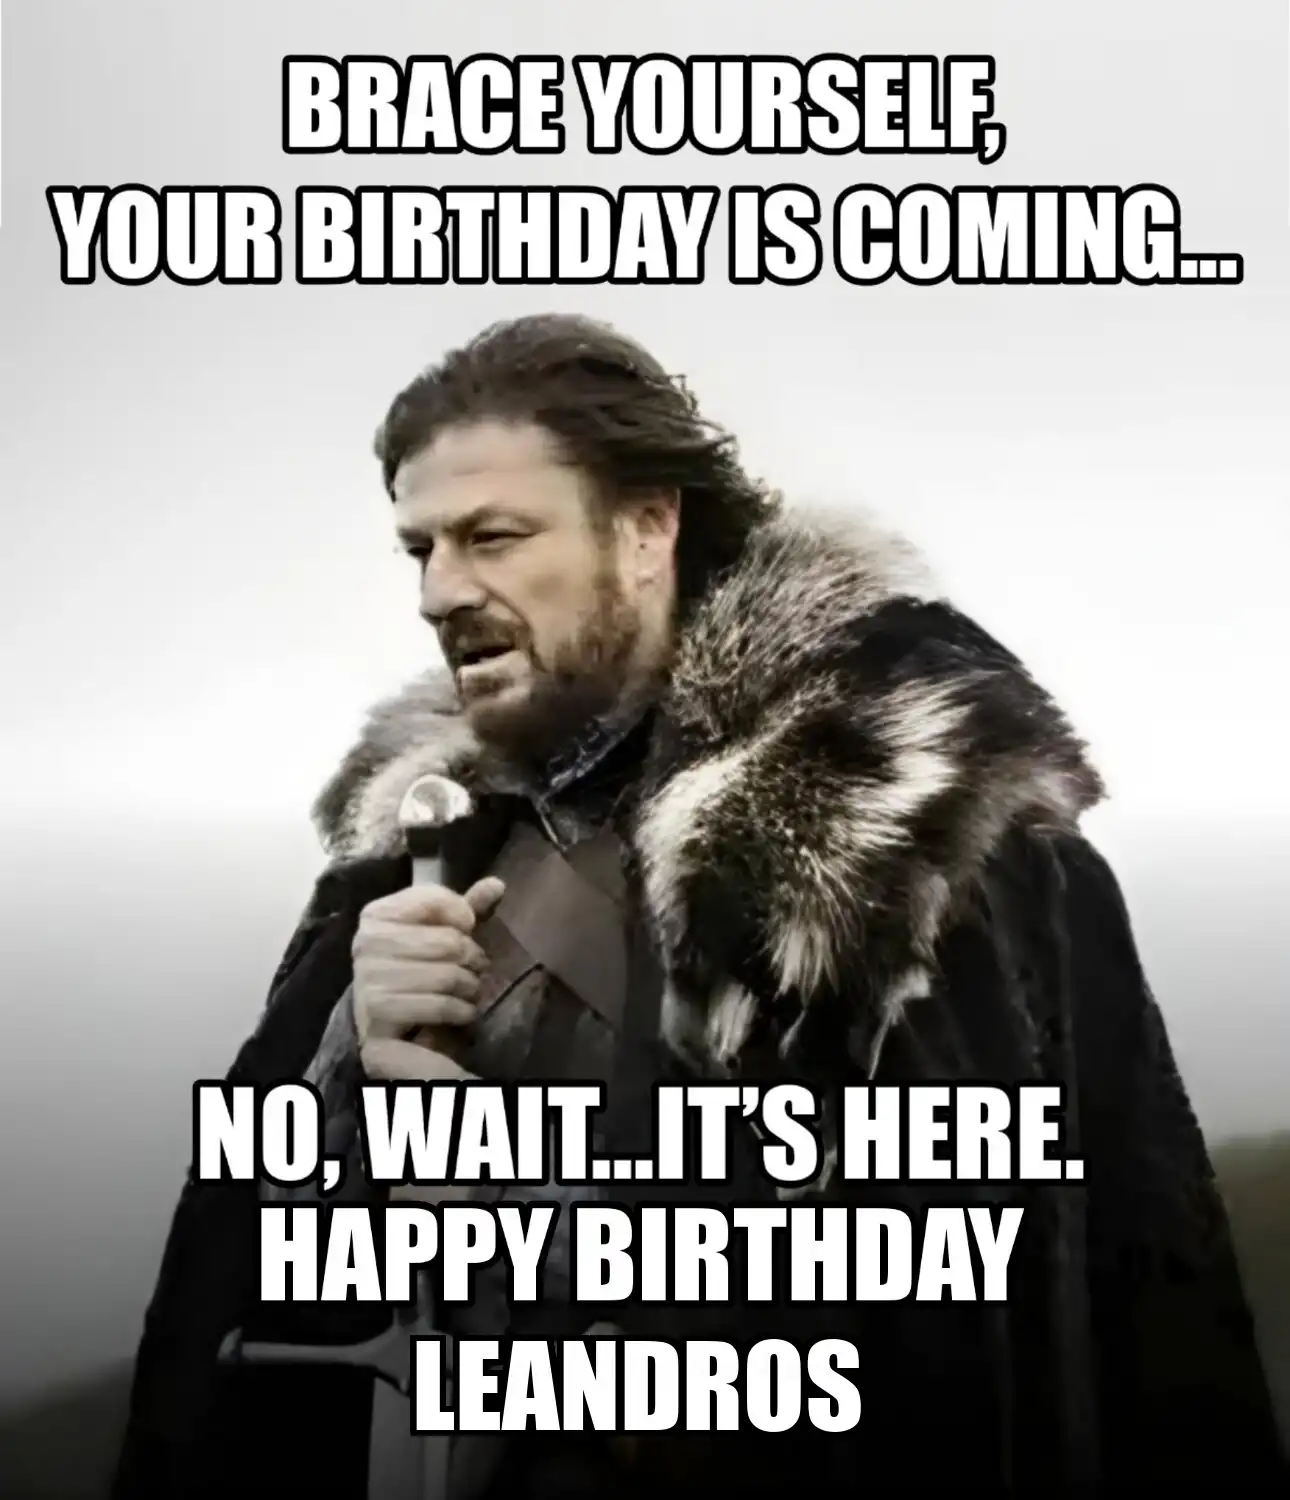 Happy Birthday Leandros Brace Yourself Your Birthday Is Coming Meme